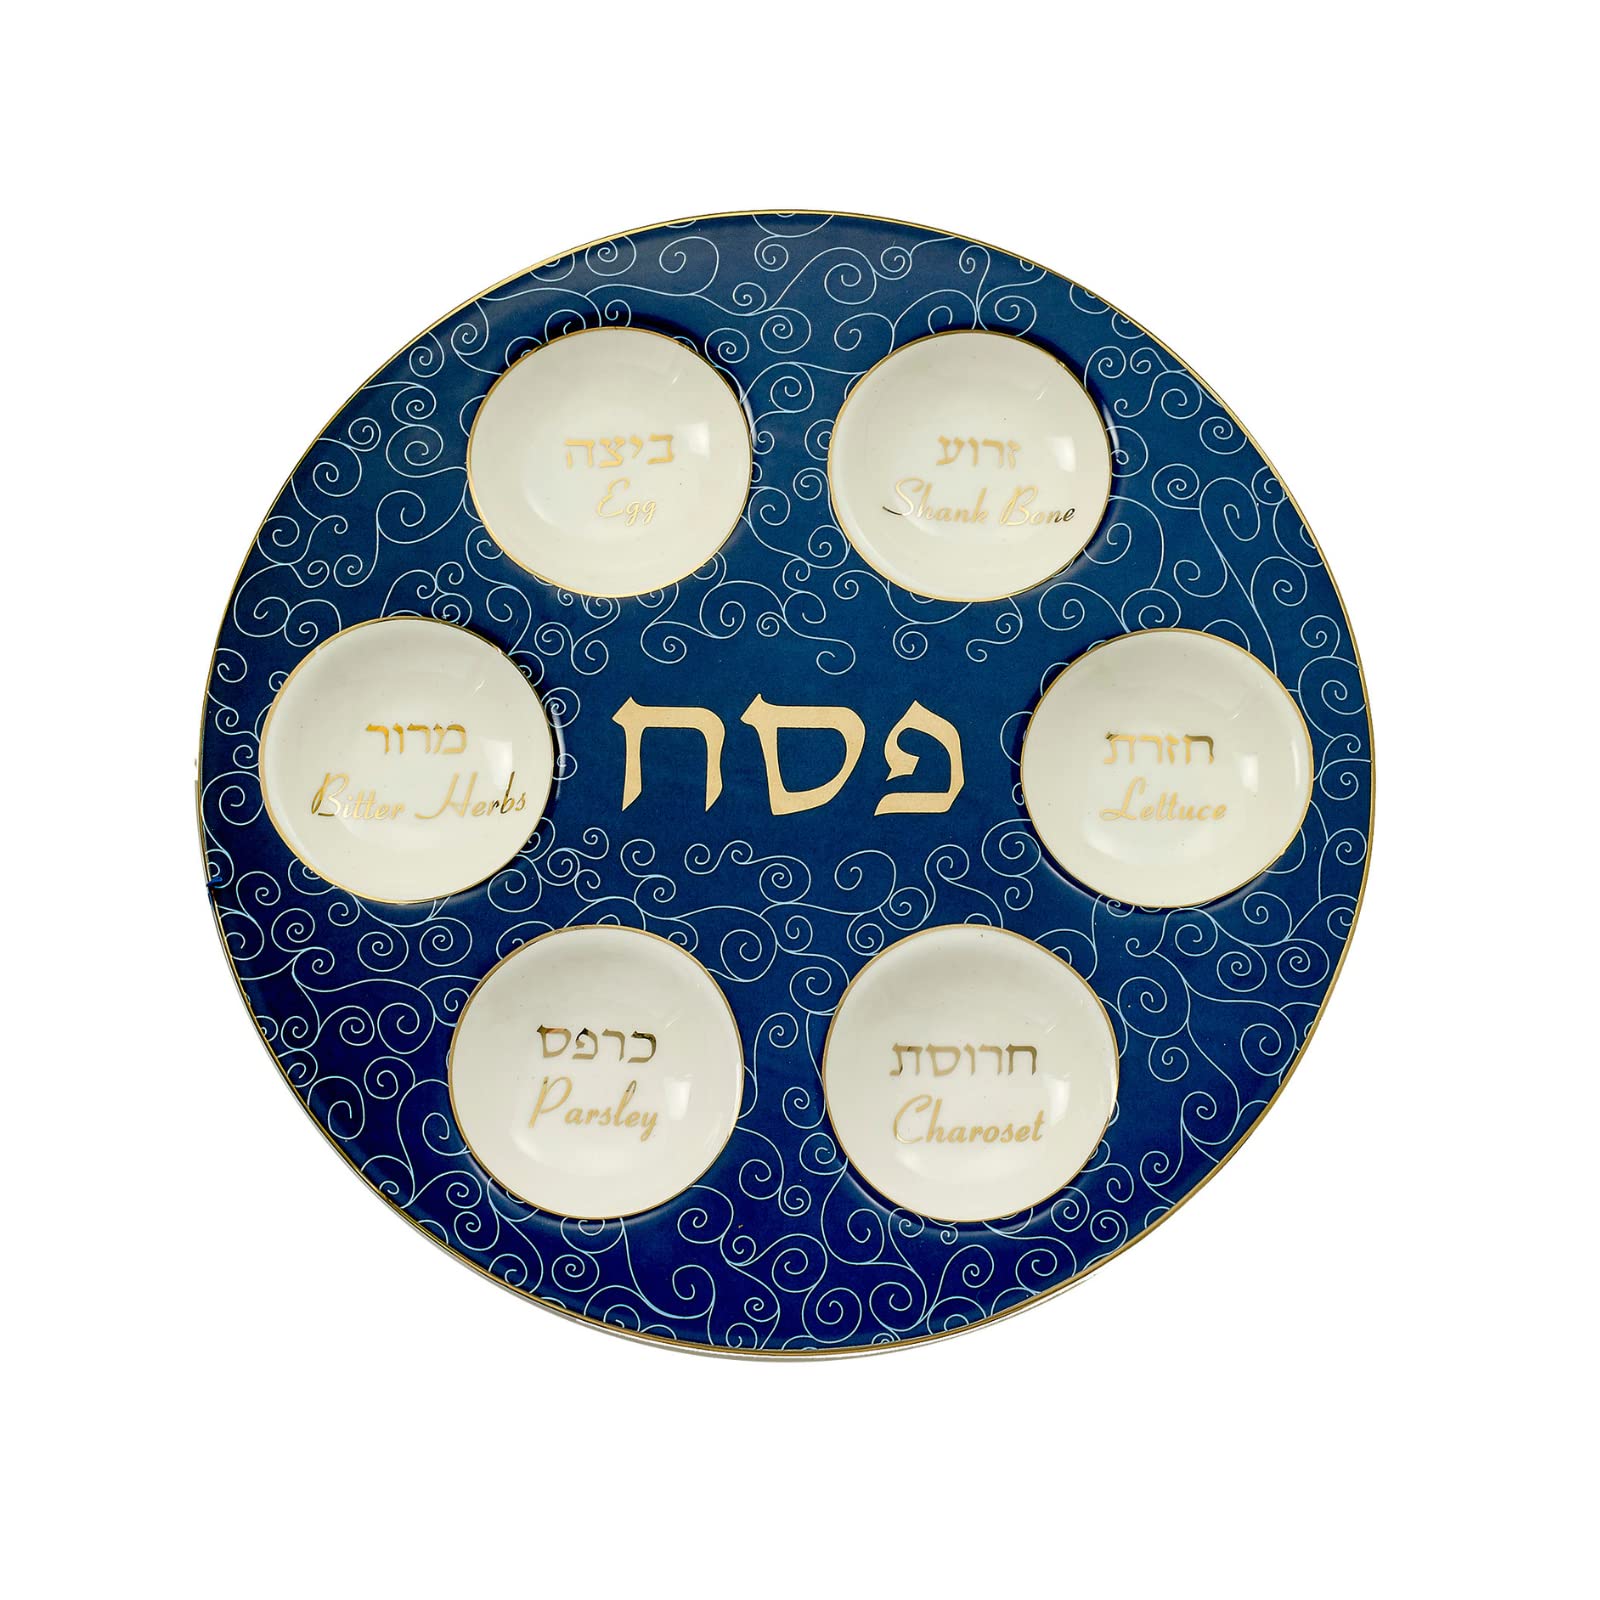 Rite Lite Blue & White Curlicue Seder Plate With Gold Accents - Elegant & Modern Pesach Seder Dish Recipe Hebrew & English Haggadah Traditional Jewish Holiday Party Decor (Seder Plate)